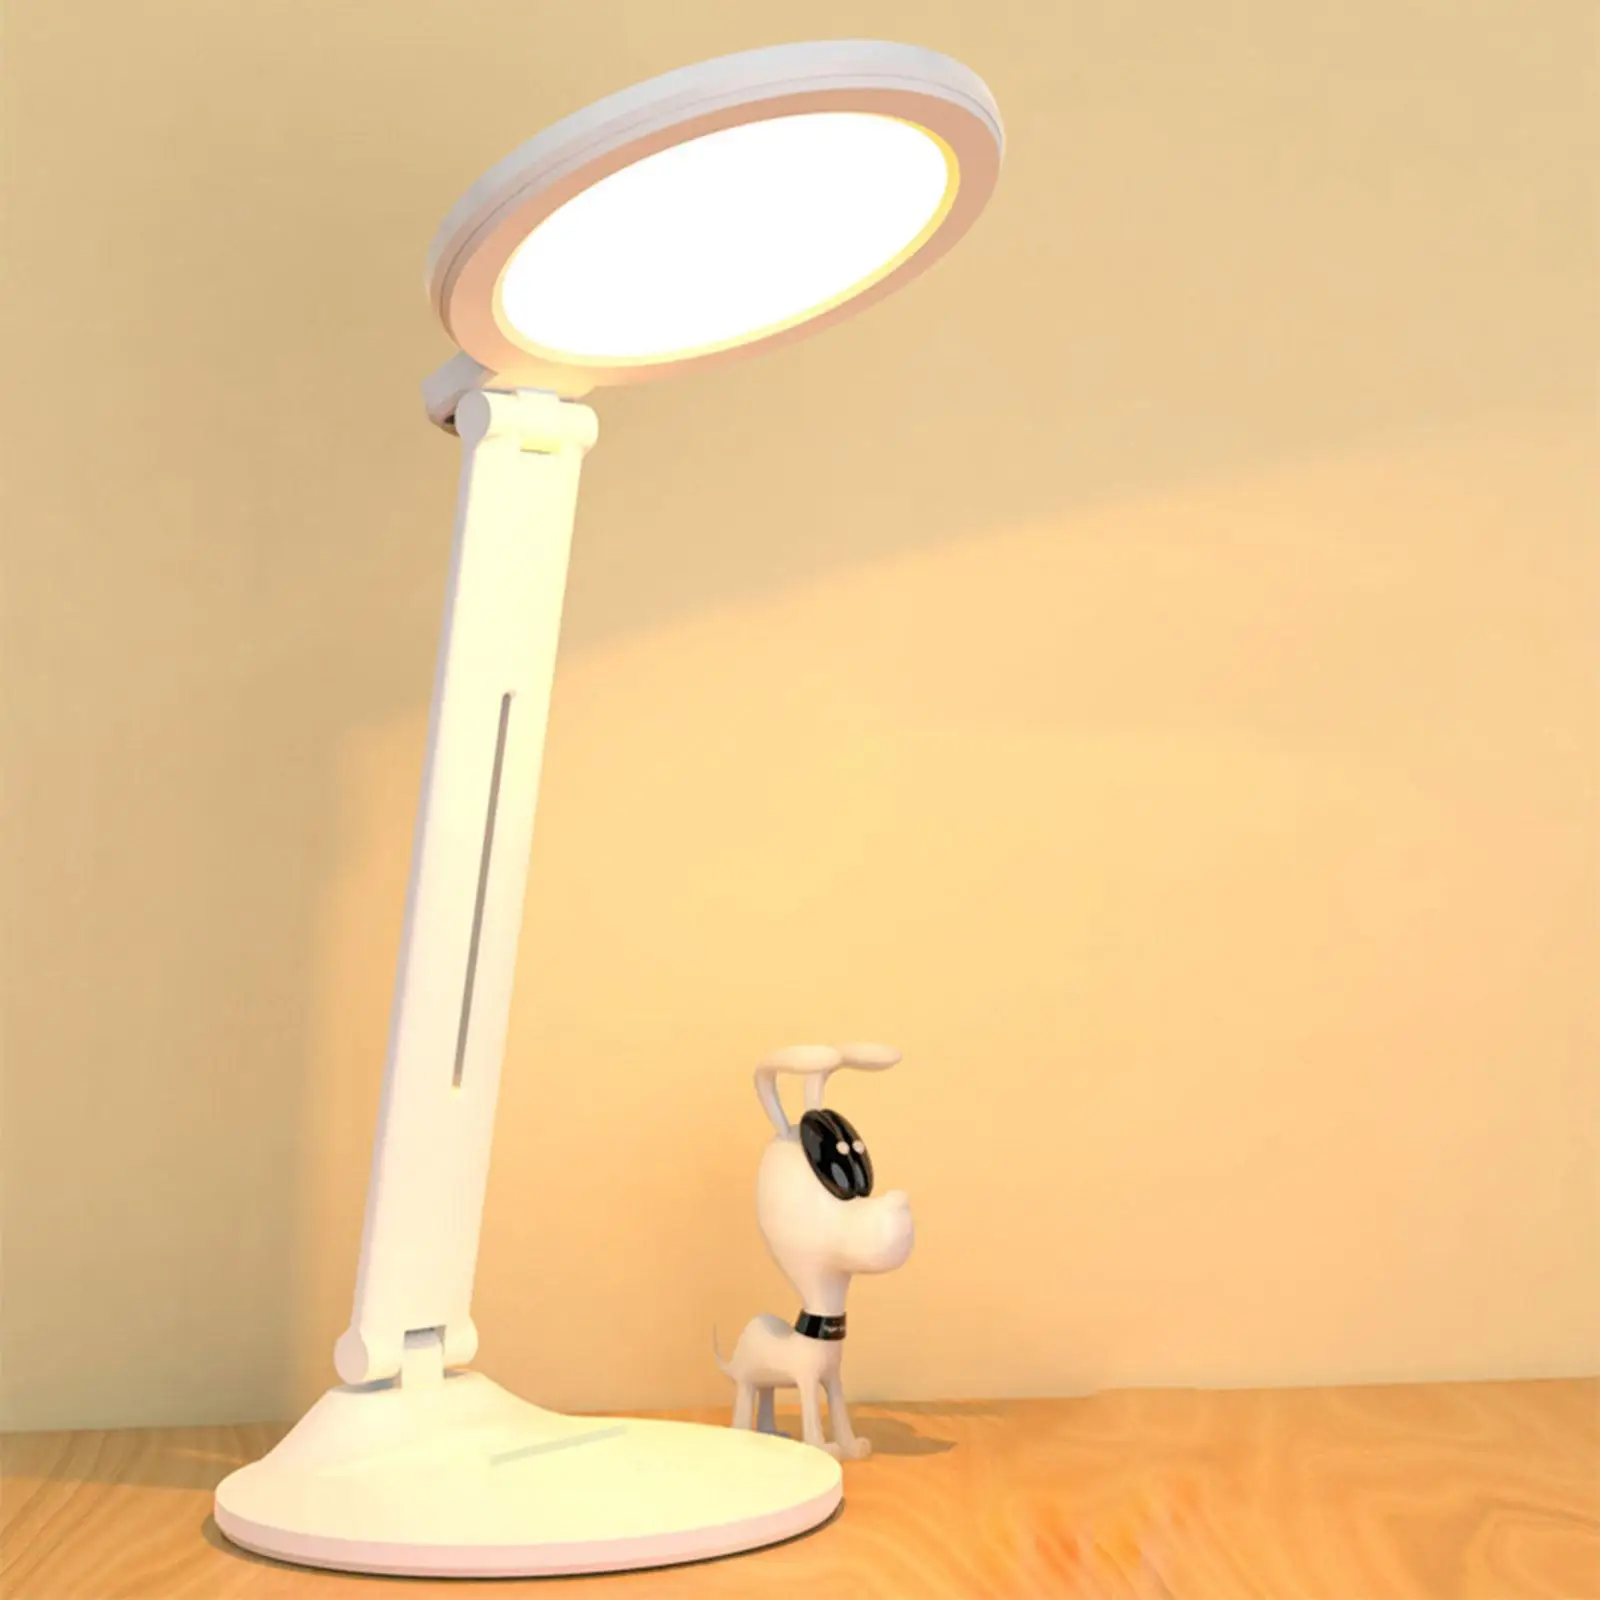 LED Desk Lamp Eye Caring 3 Modes Reading Light Touch Dimmable Bedside Lamp USB Table Lamp for Home Dorm Office Bedroom Study